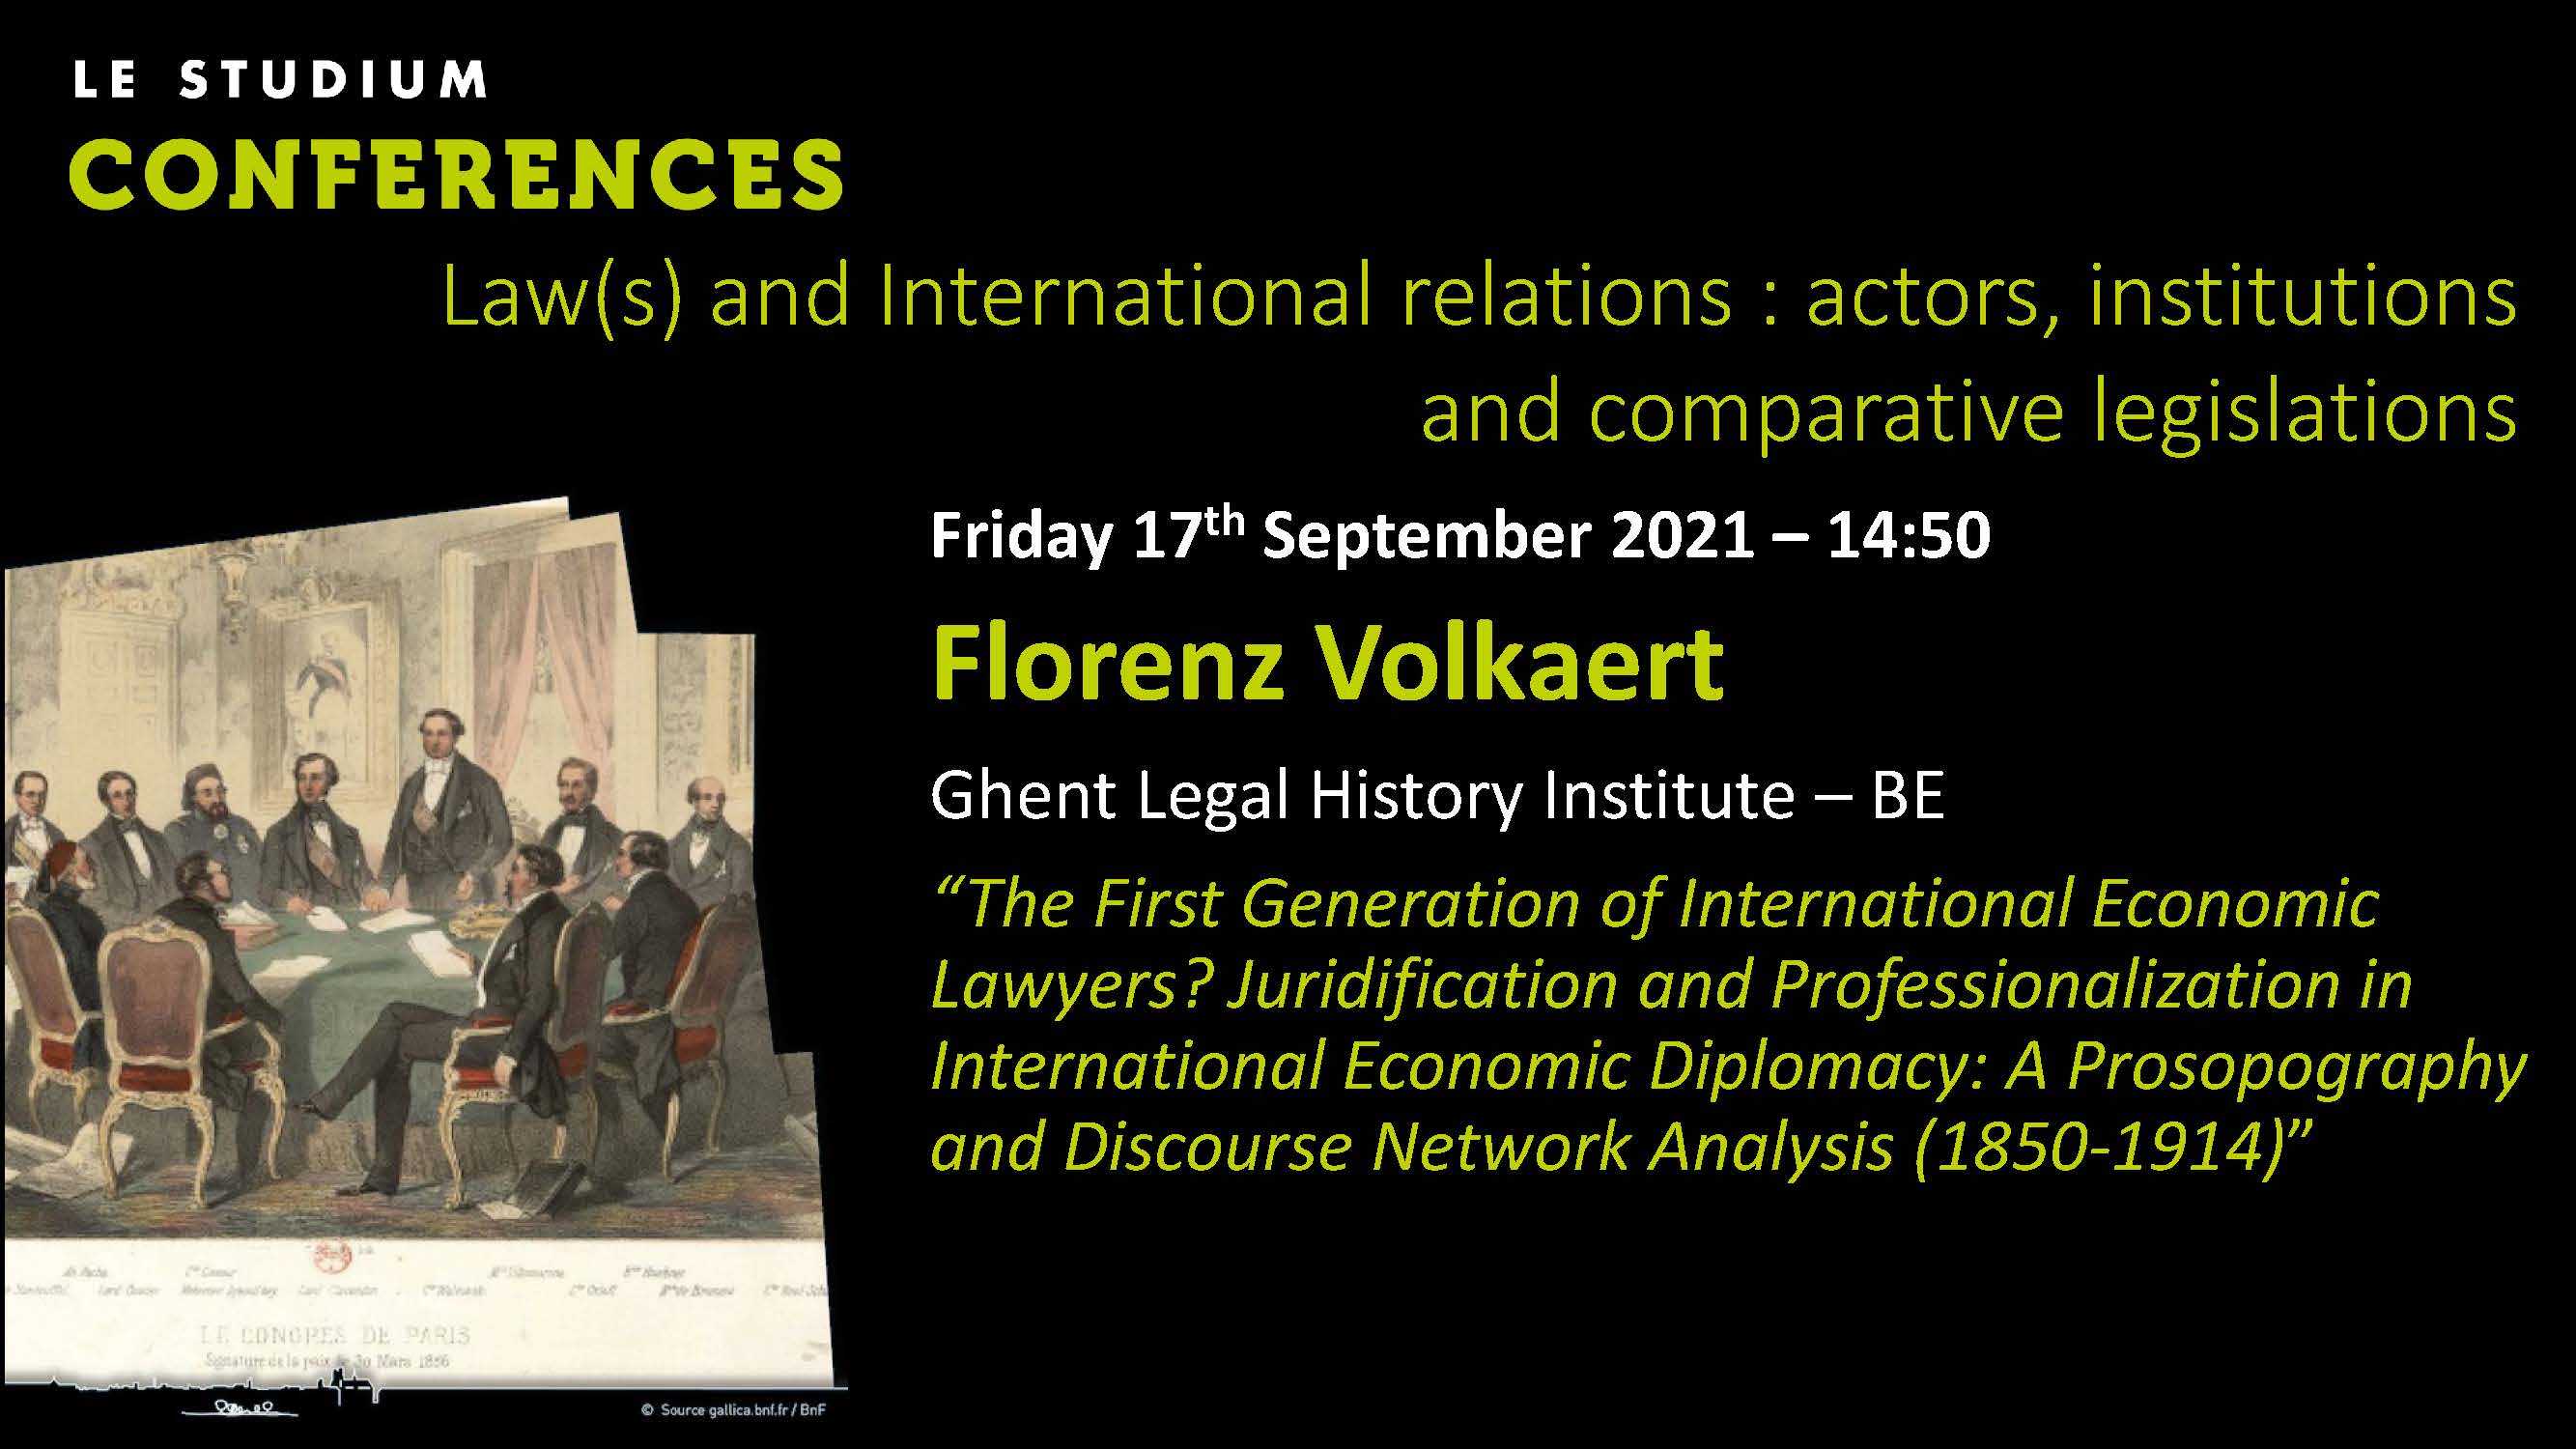 Florenz Volkaert - The First Generation of International Economic Lawyers? Juridification and Professionalization in International Economic Diplomacy: A Prosopography and Discourse Network Analysis (1850-1914)